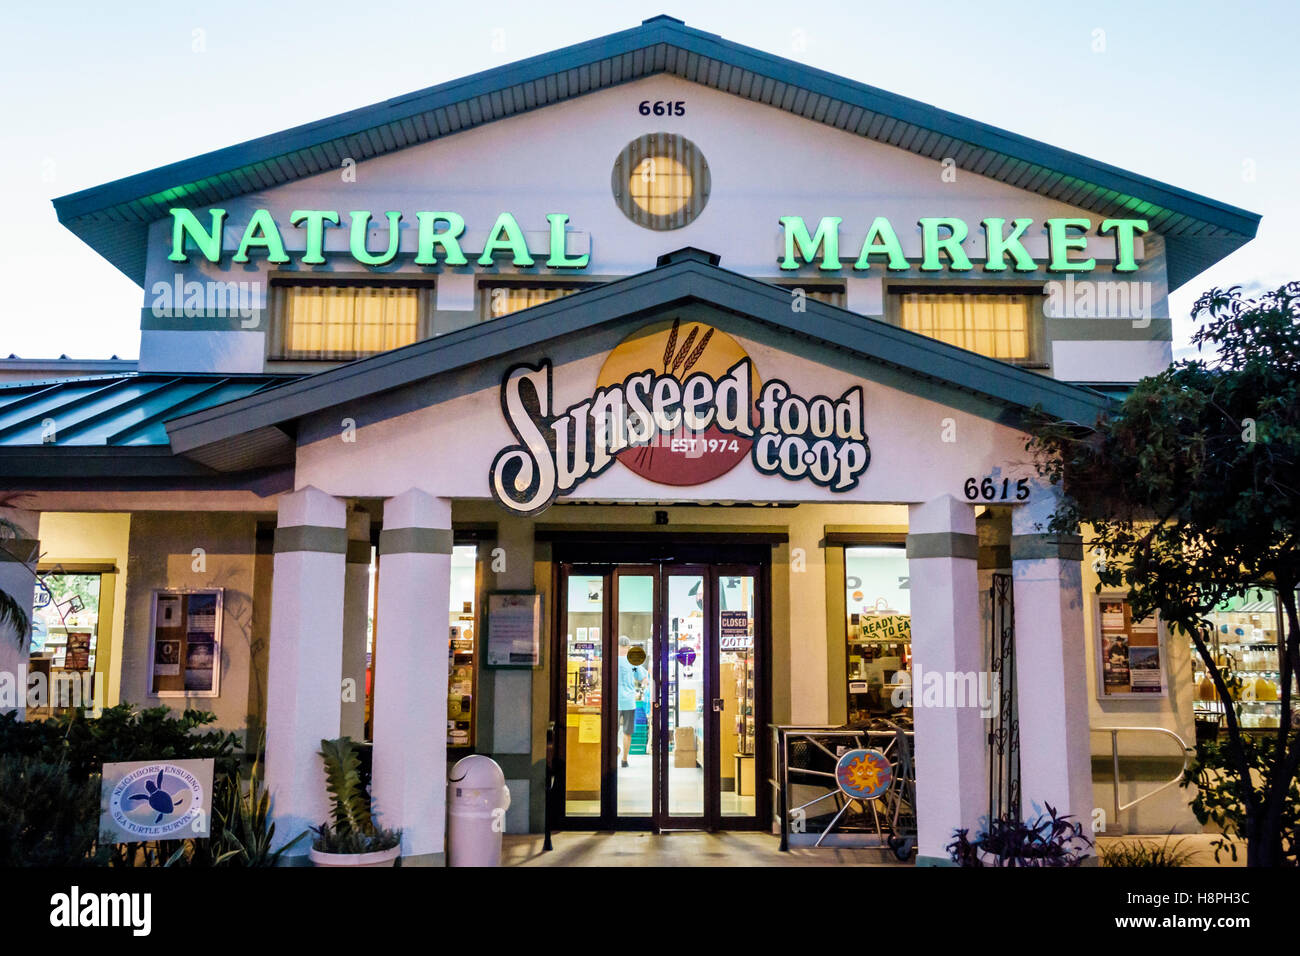 Florida Cape Canaveral,Sunseed Food Co-op,natural market,grocery store,supermarket,FL161025114 Stock Photo